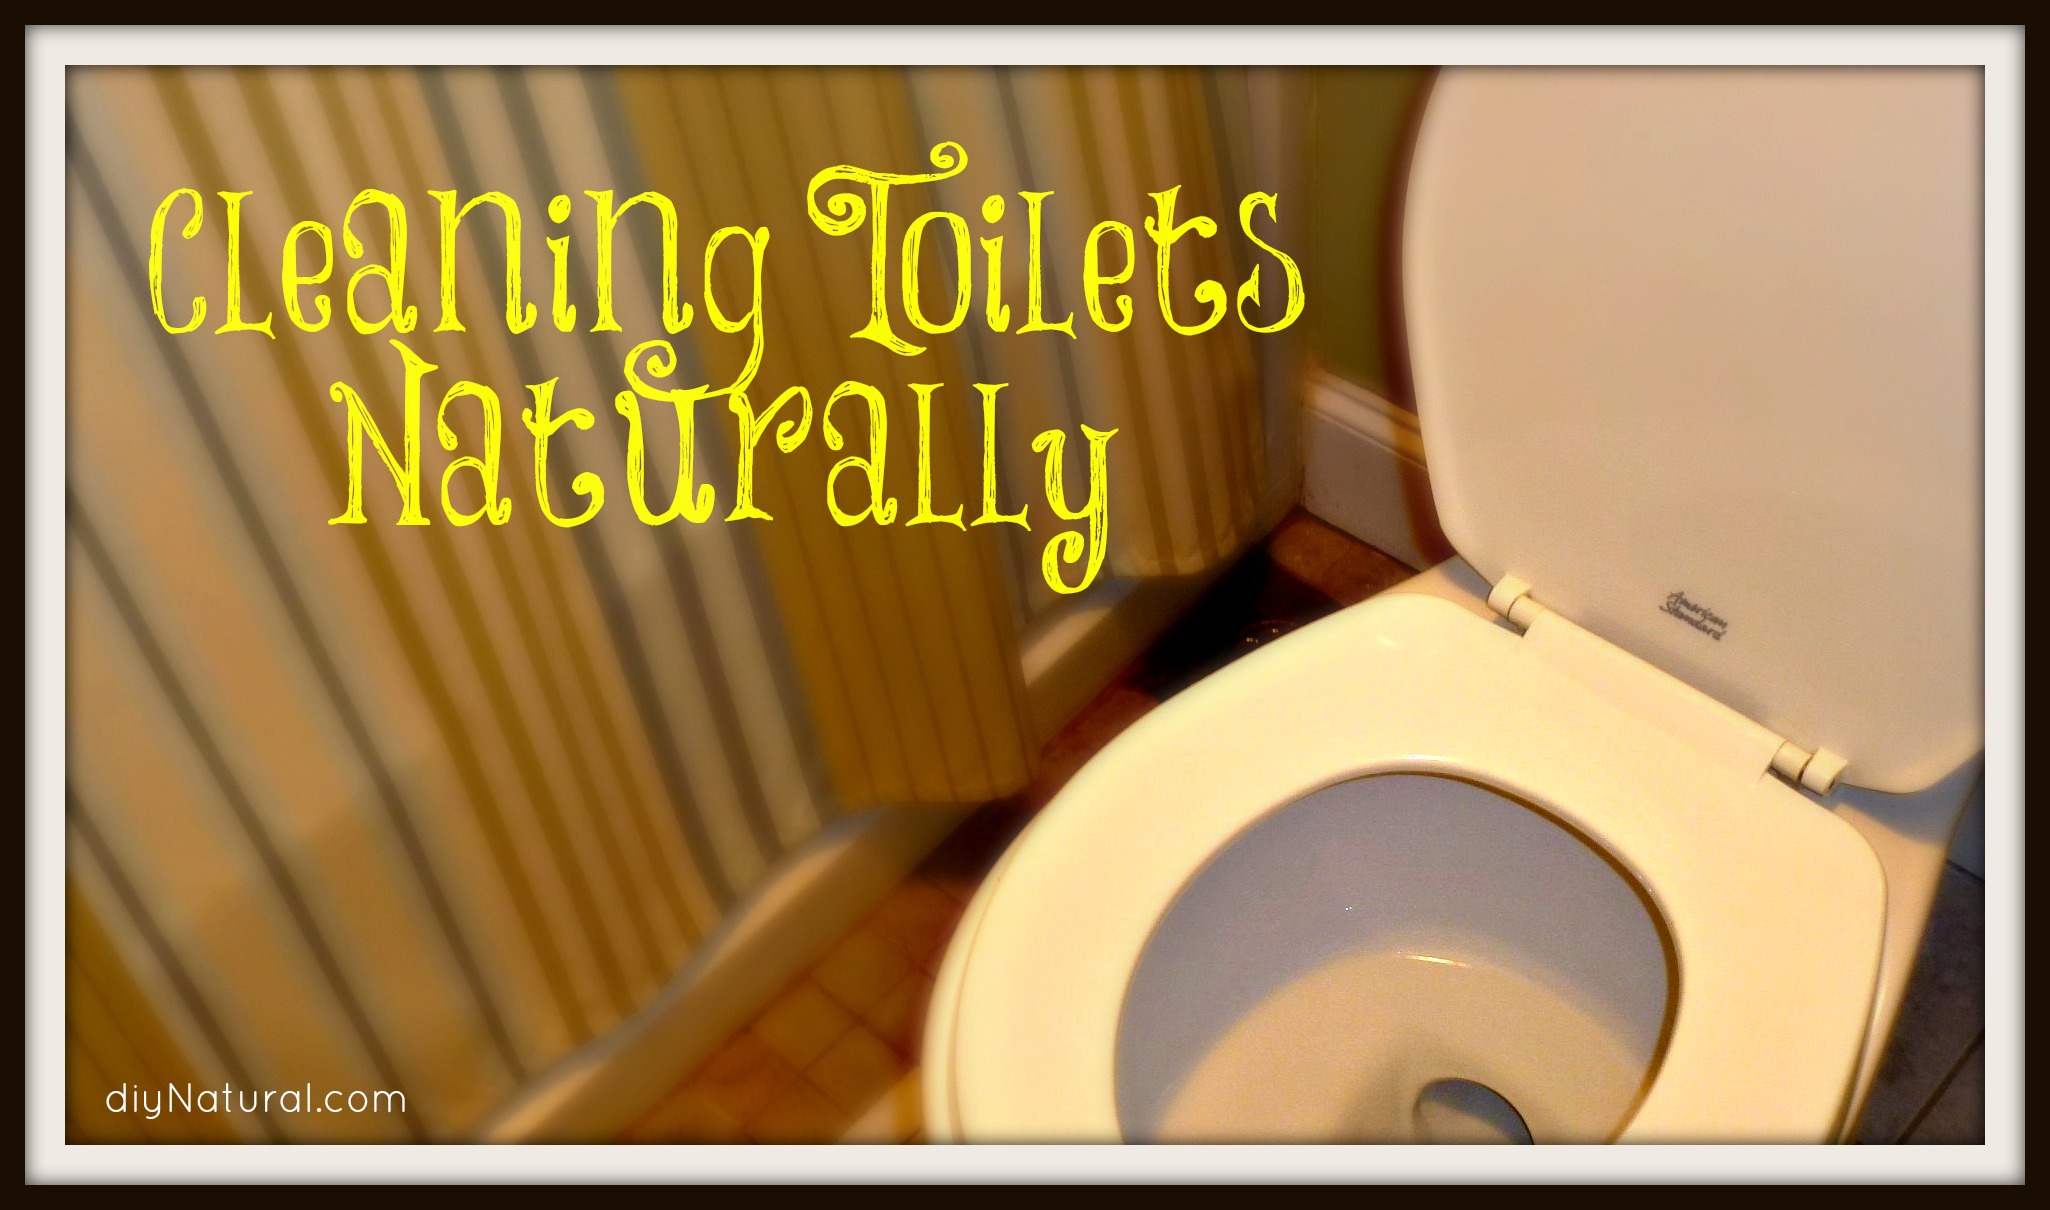 5 Harmful Chemicals in Your Toilet Cleaners That You Must Be Afraid Of